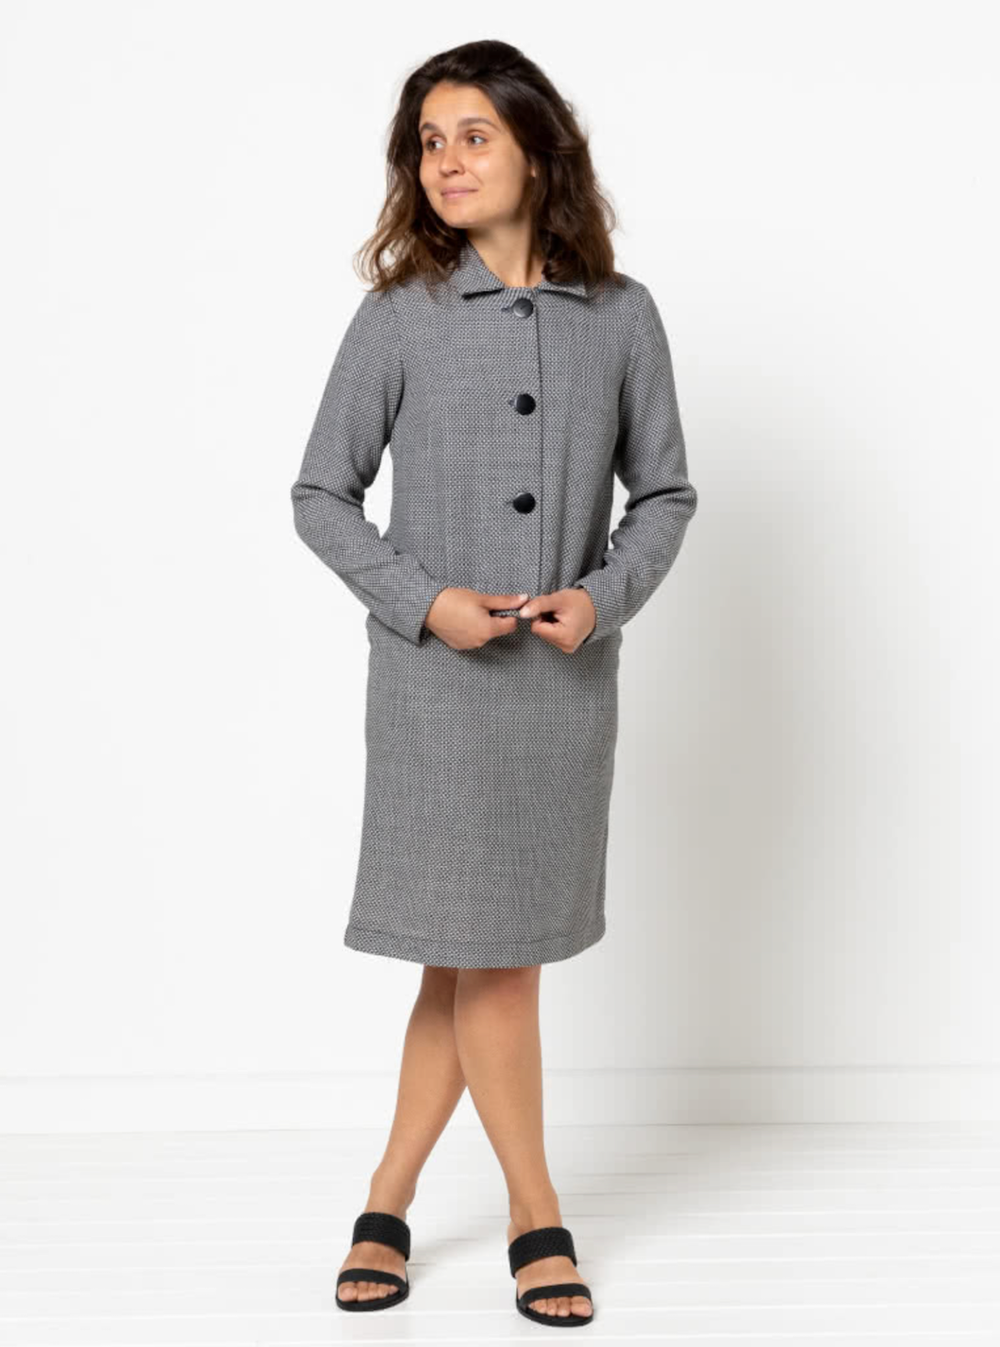 Woman wearing the Harriet Jacket sewing pattern from Style Arc on The Fold Line. A lined or unlined jacket pattern made in fine wool, silk brocade, or linen fabric, featuring a boxy silhouette, collar, button front, bust darts, and darted one piece sleeve